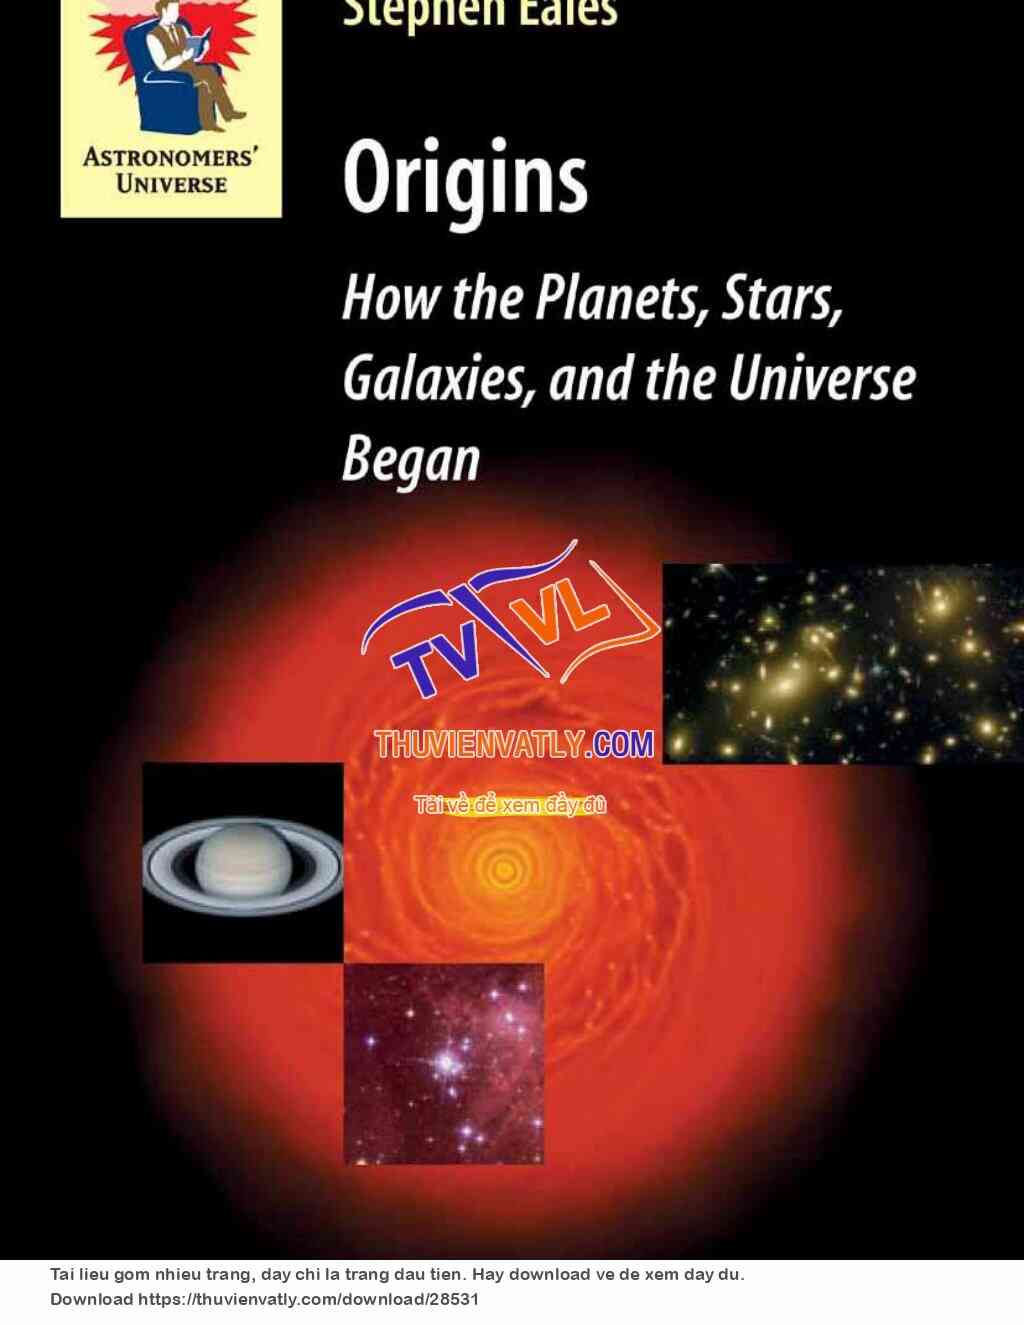 How the Planets, Stars, Galaxies, and the Universe Began